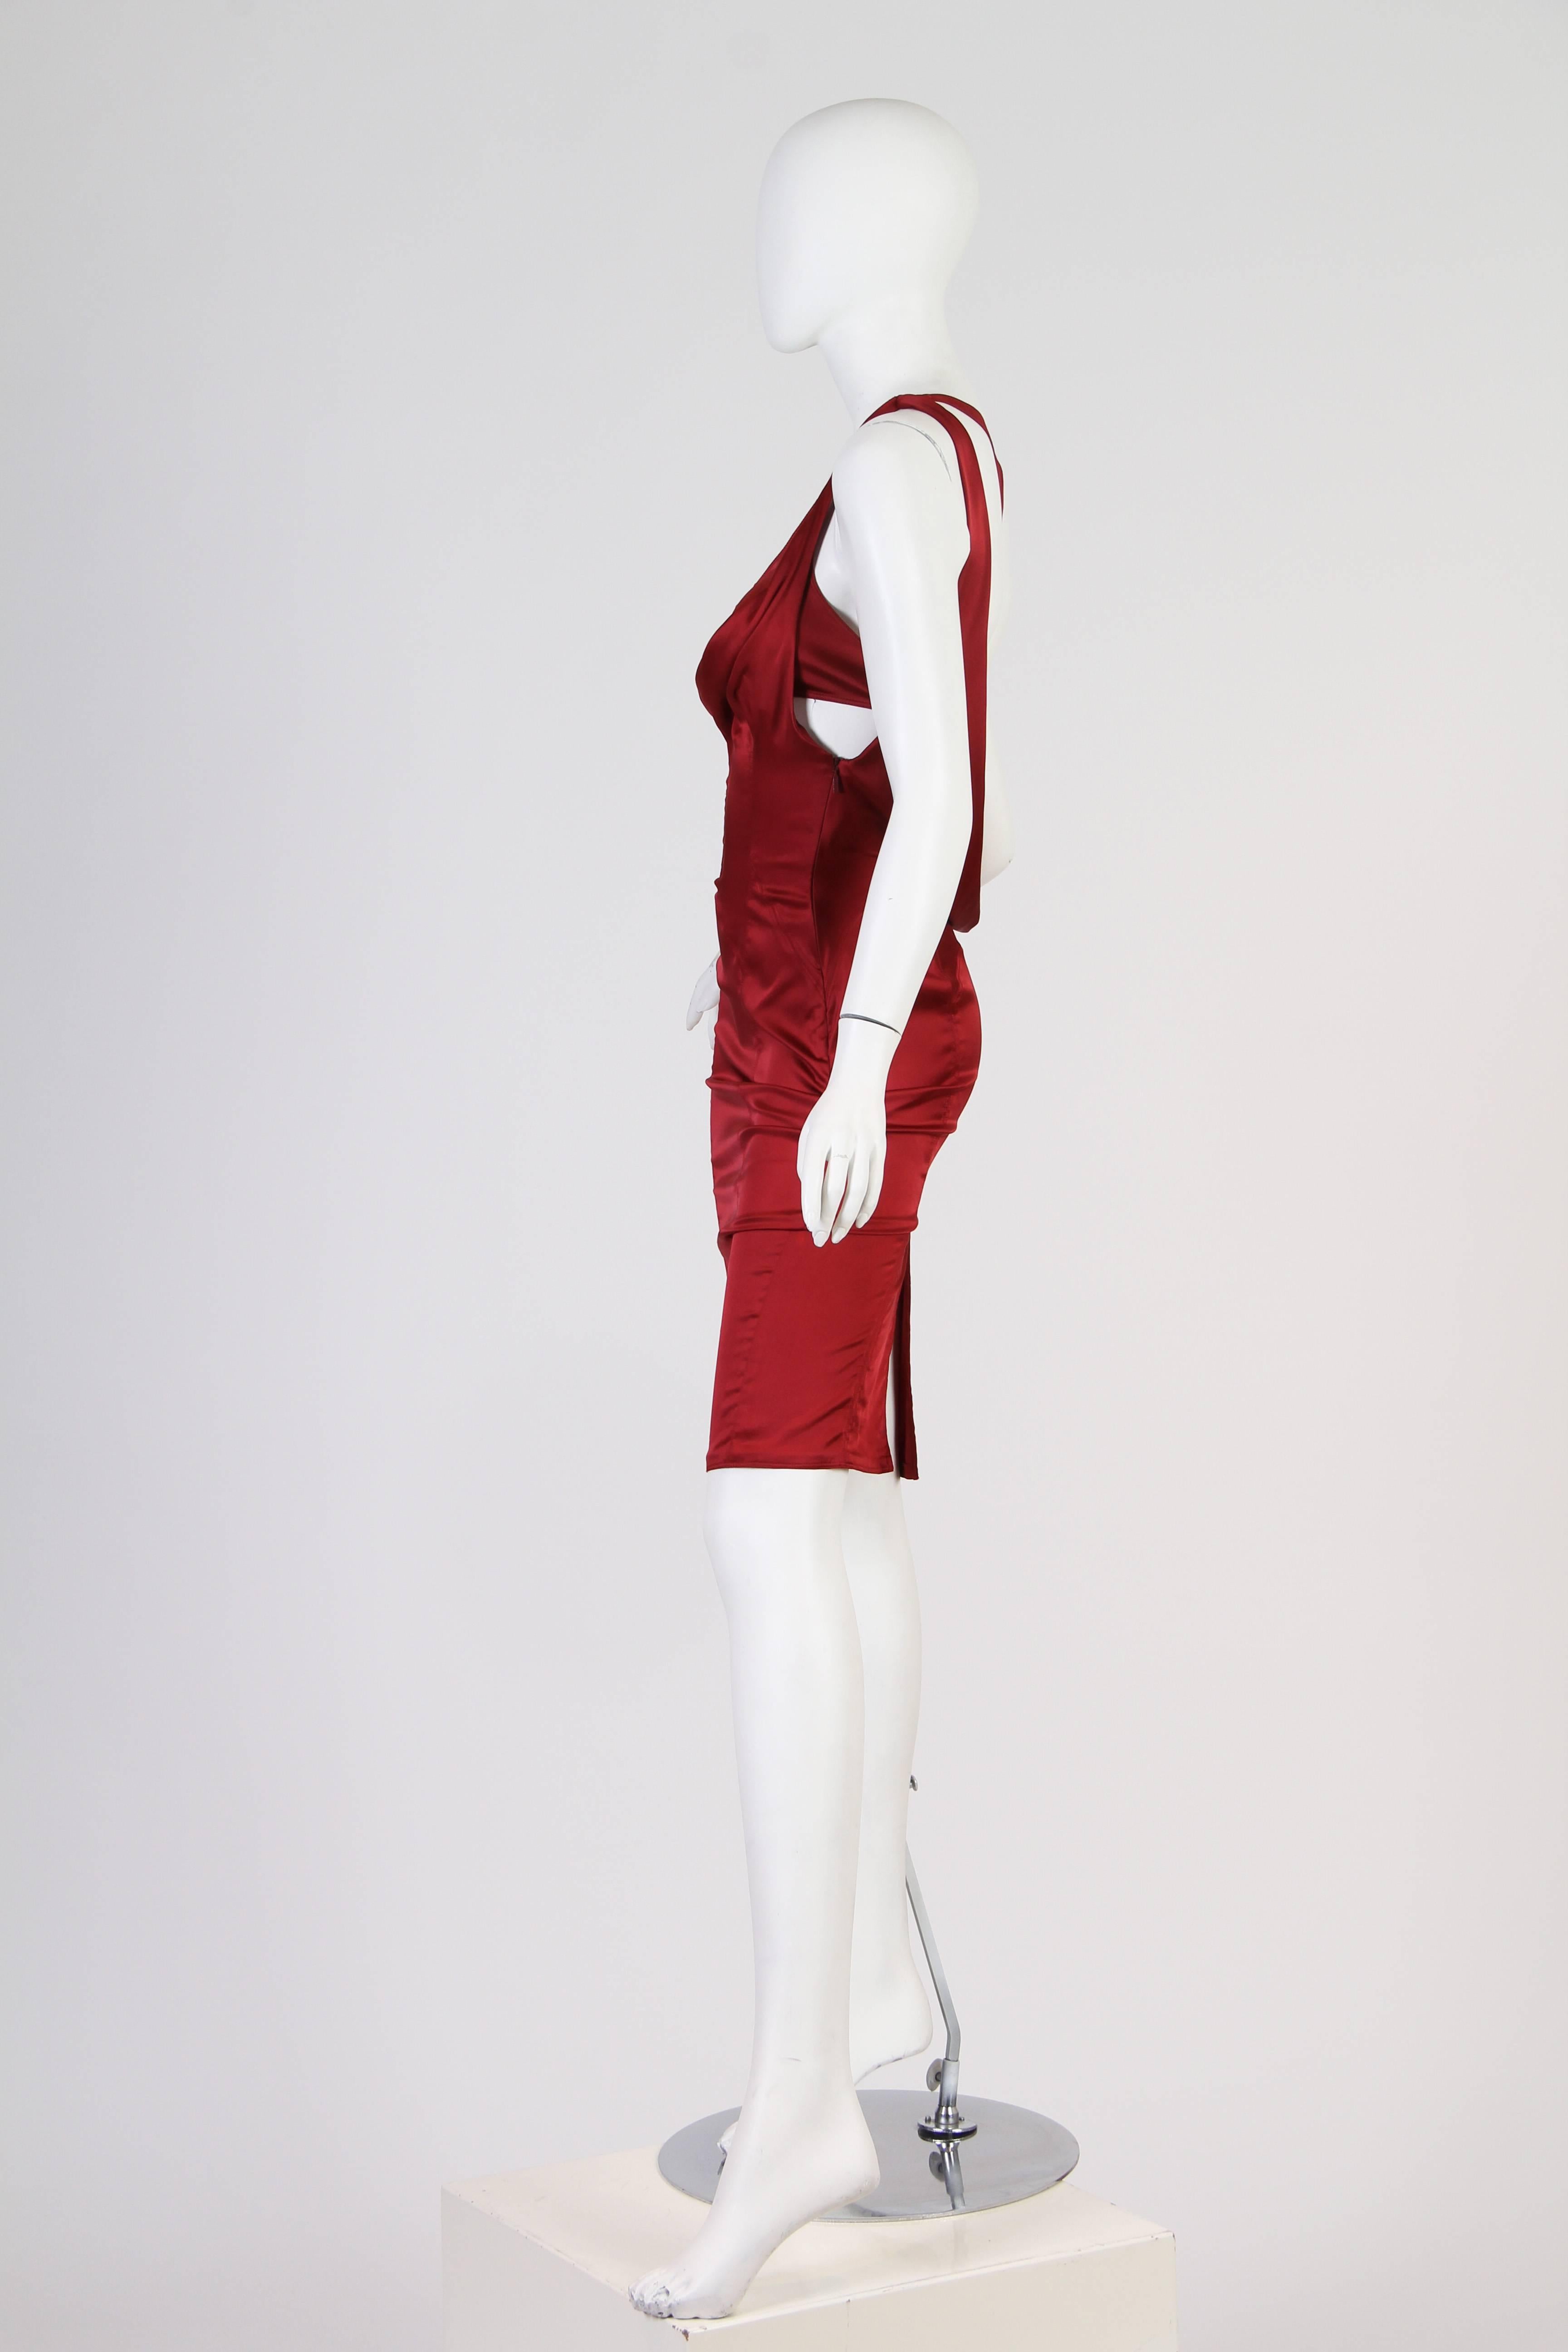 Red Tom Ford Gucci Runway Dress and Corset